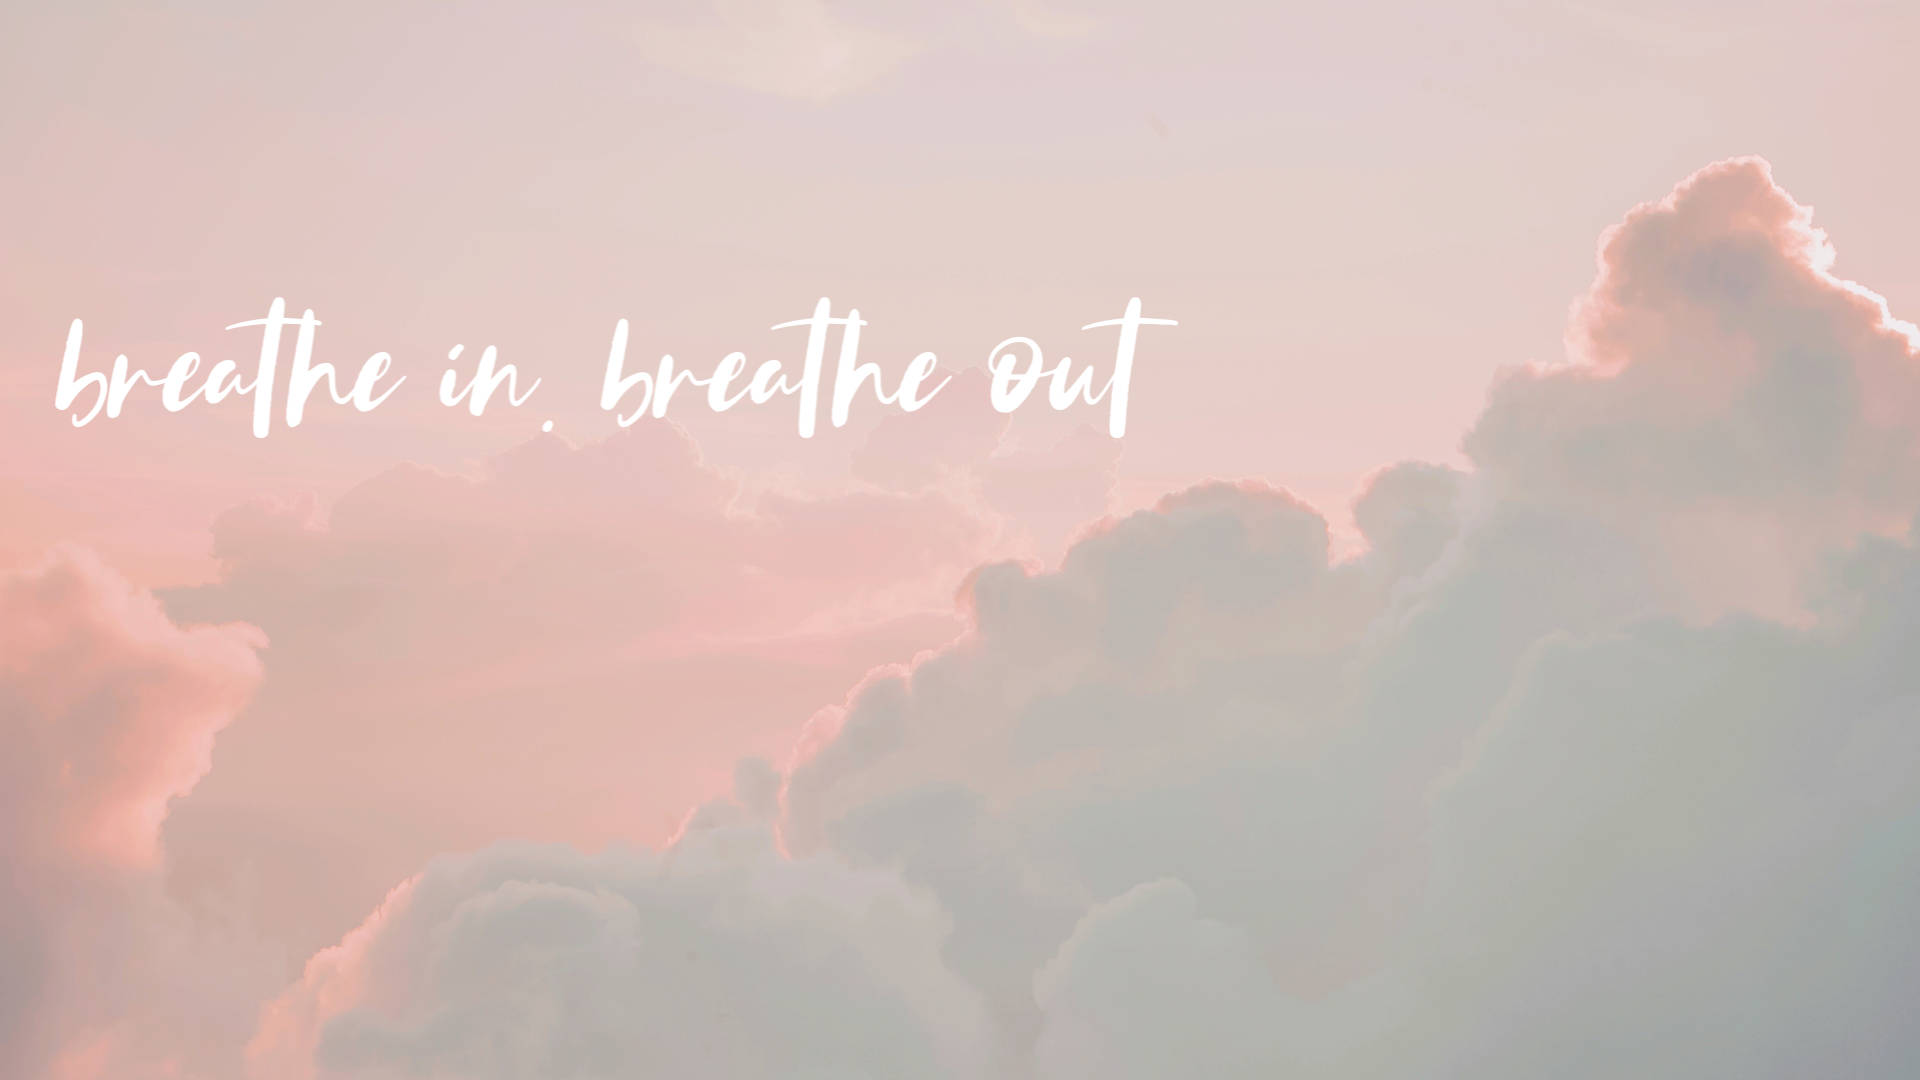 Breathe In Breathe Out Pastel Aesthetic Tumblr Laptop